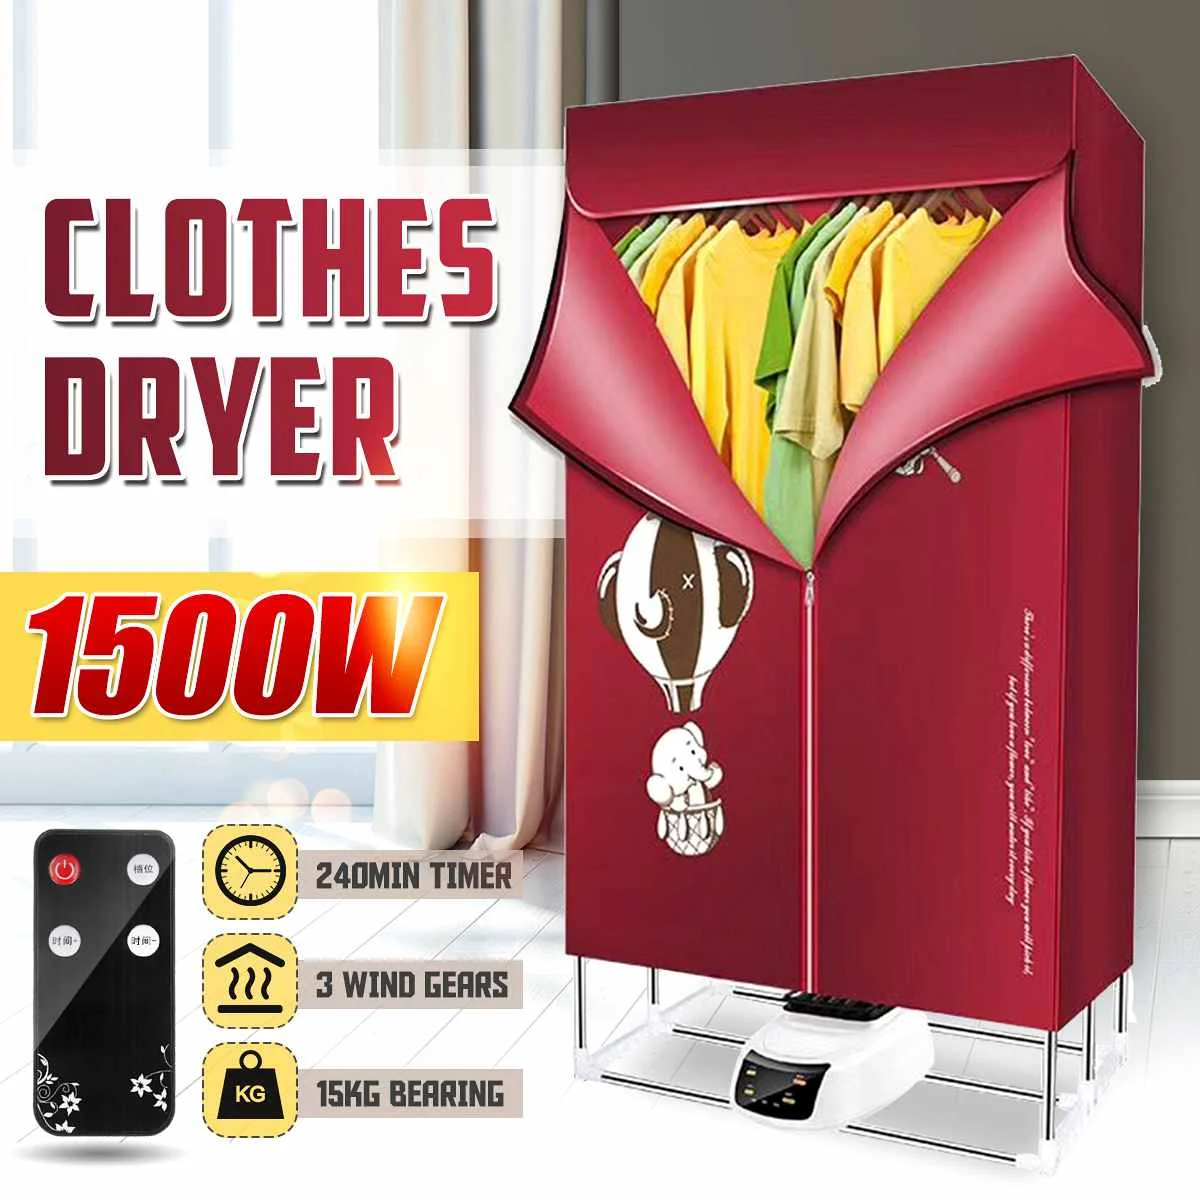 110-240V 1500W Foldable Electric Clothing Dryer Home Clothes Drying Portable